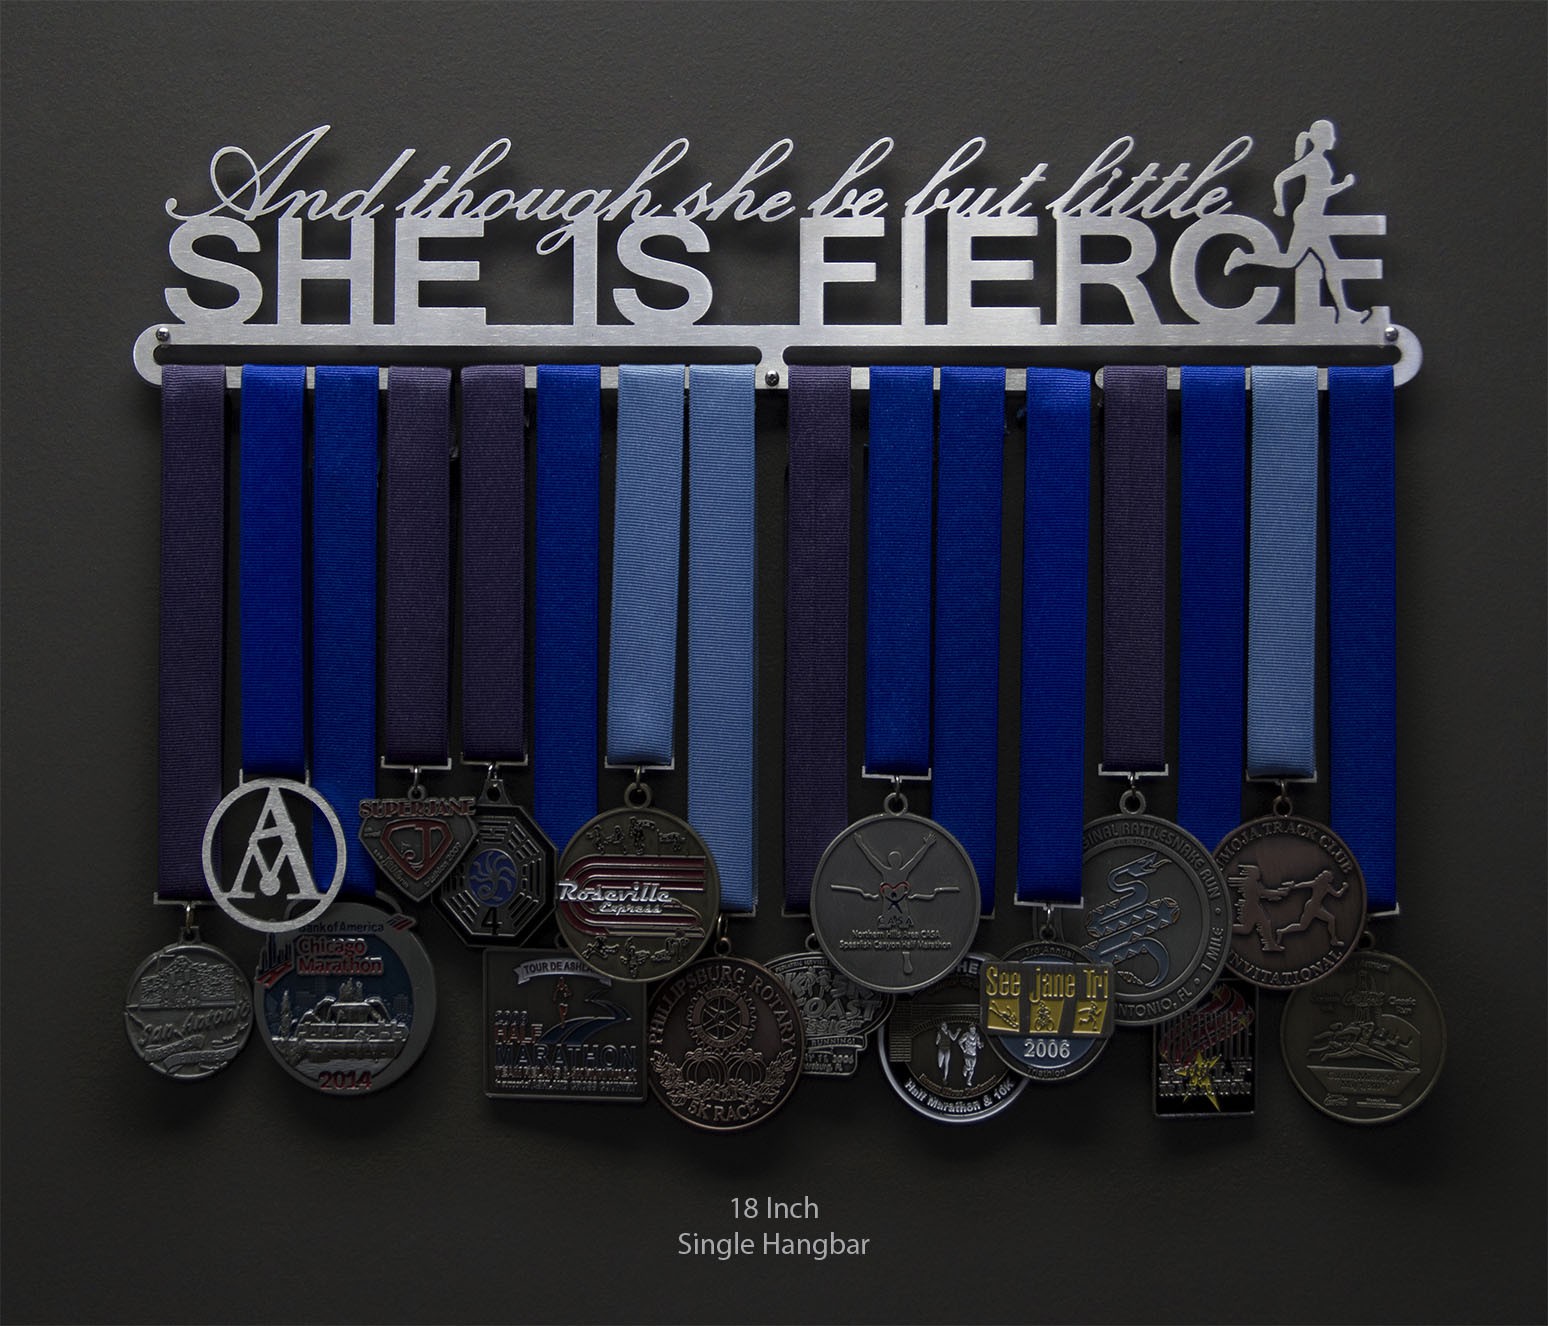 Gone For a Run Hooked on Medal Hanger & Bib Display She is Fierce Colors 